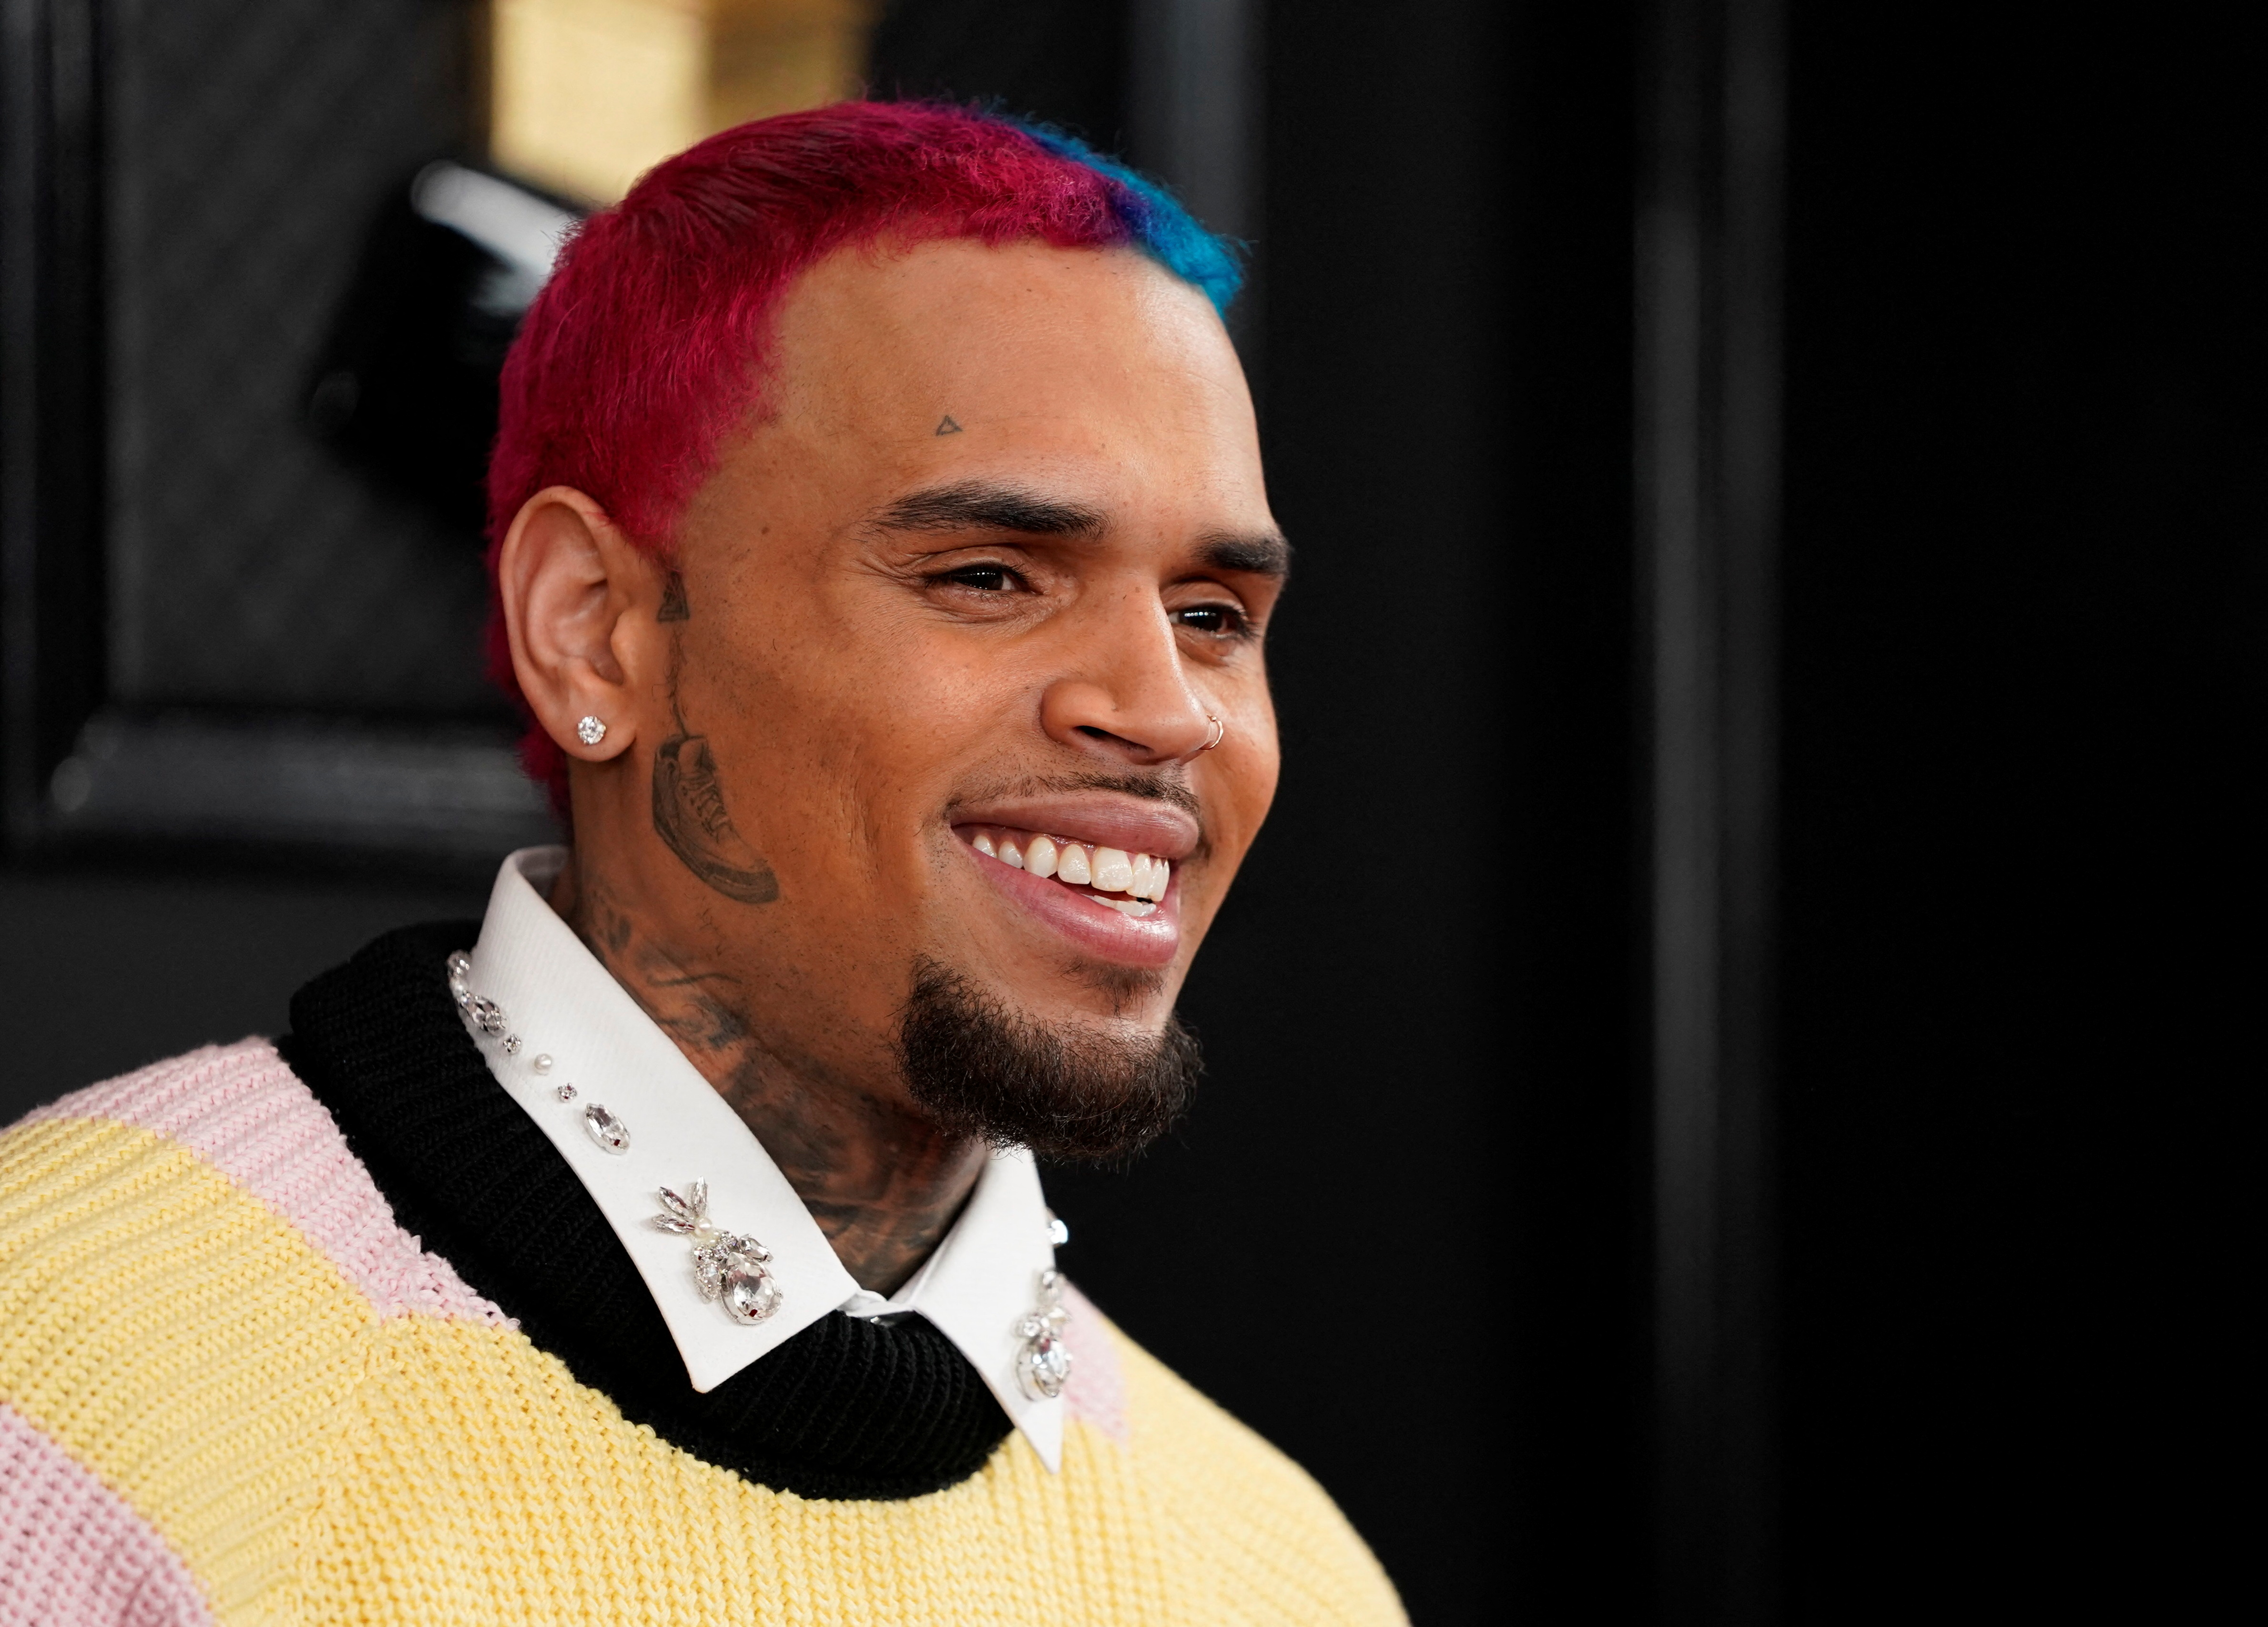 Chris Brown has had to face justice on multiple occasions (REUTERS/Mike Blake/File Photo)